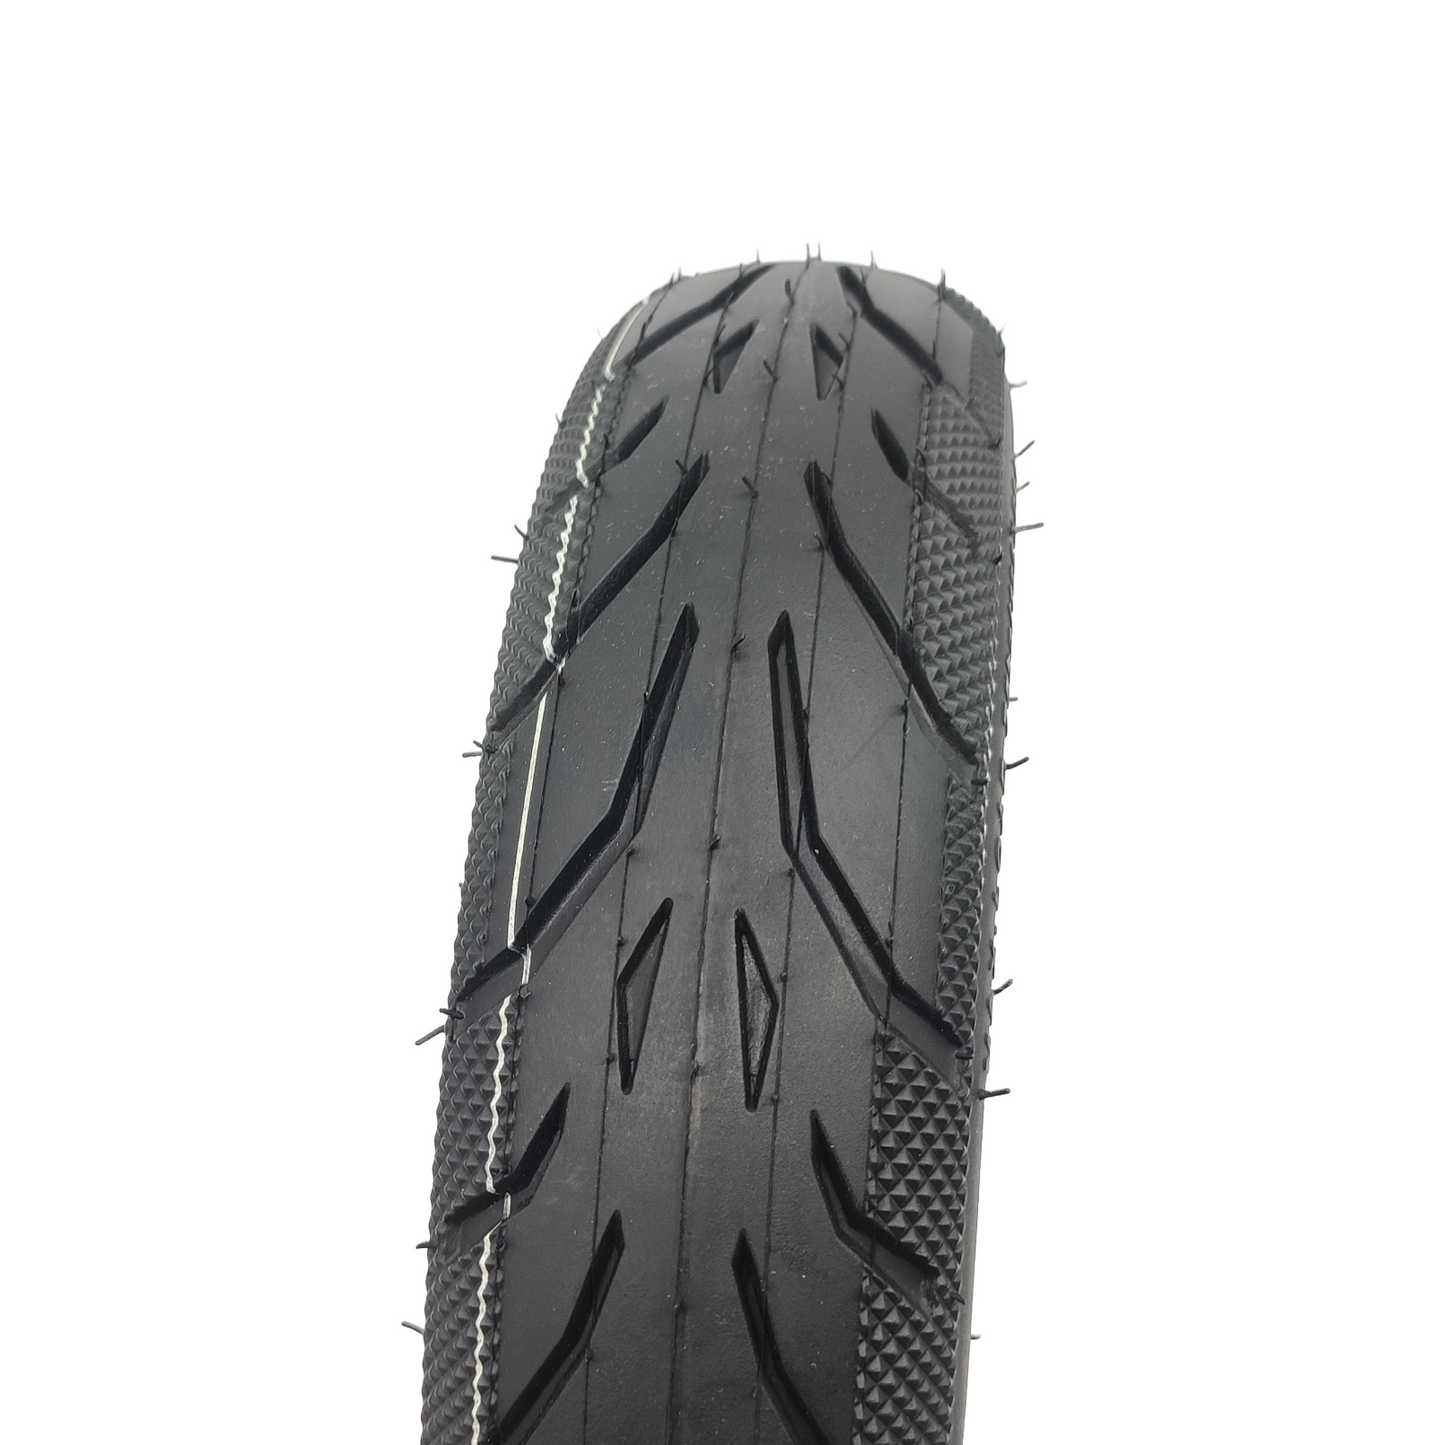 Ninebot Segway F25i tires 10x2.125 - 6.5 inches